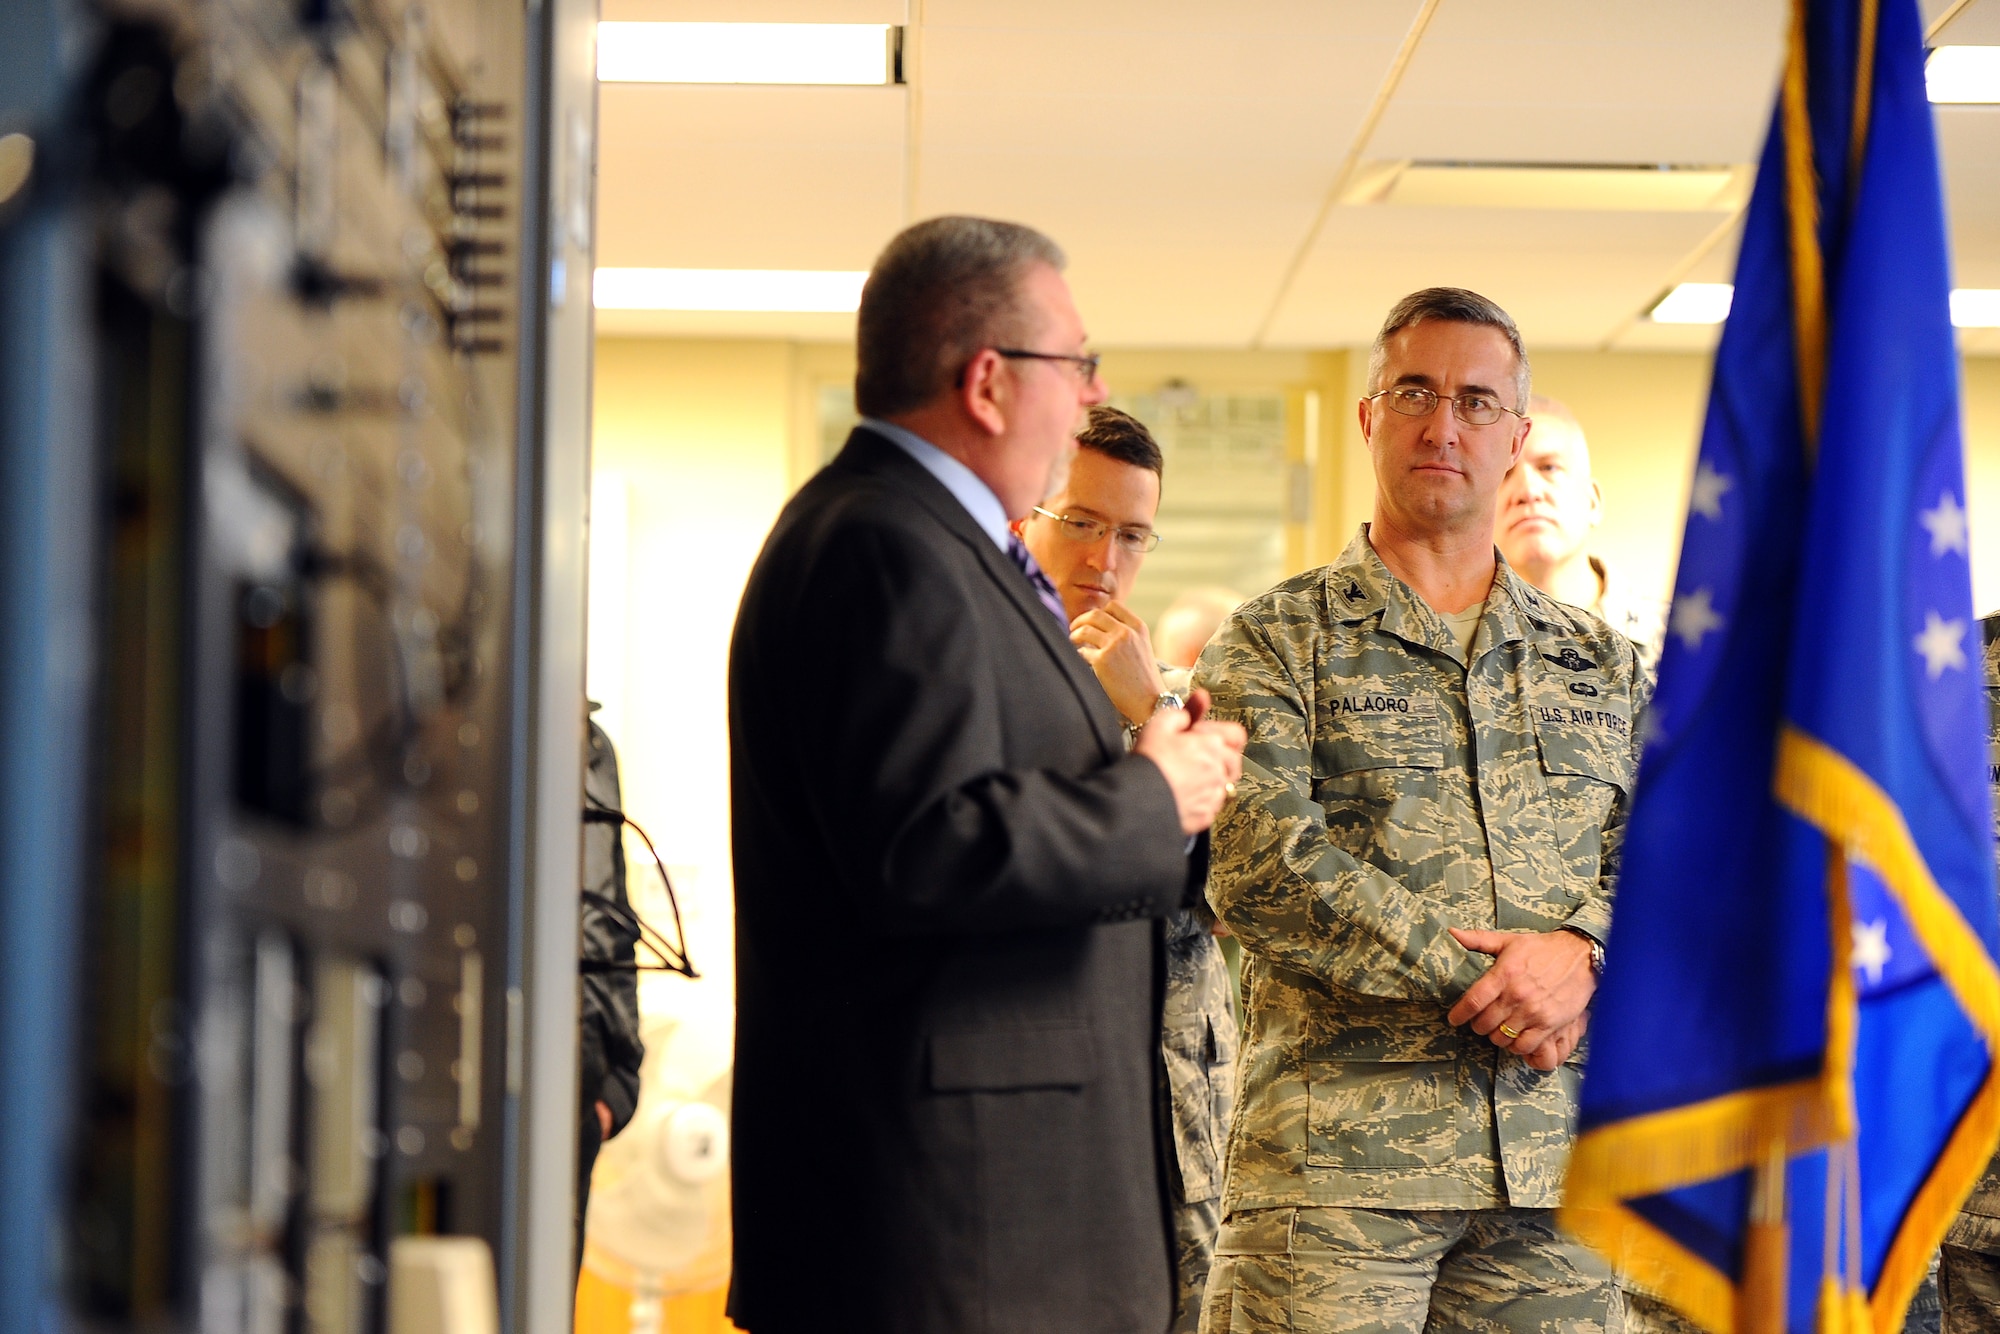 Dave Clingerman, a telecommunications specialist with the 55th Strategic Communications Squadron, briefs U.S. Air Force Col. Hans Palaoro, 55th Wing vice commander, along with members of the 55th Communications Group leadership on the mission and equipment used at the High Frequency Global Communication System Jan. 29, Elkhorn, Neb.  The annex is located 30 miles northwest of Offutt Air Force Base.  (U.S. Air Force photo by Josh Plueger/Released)